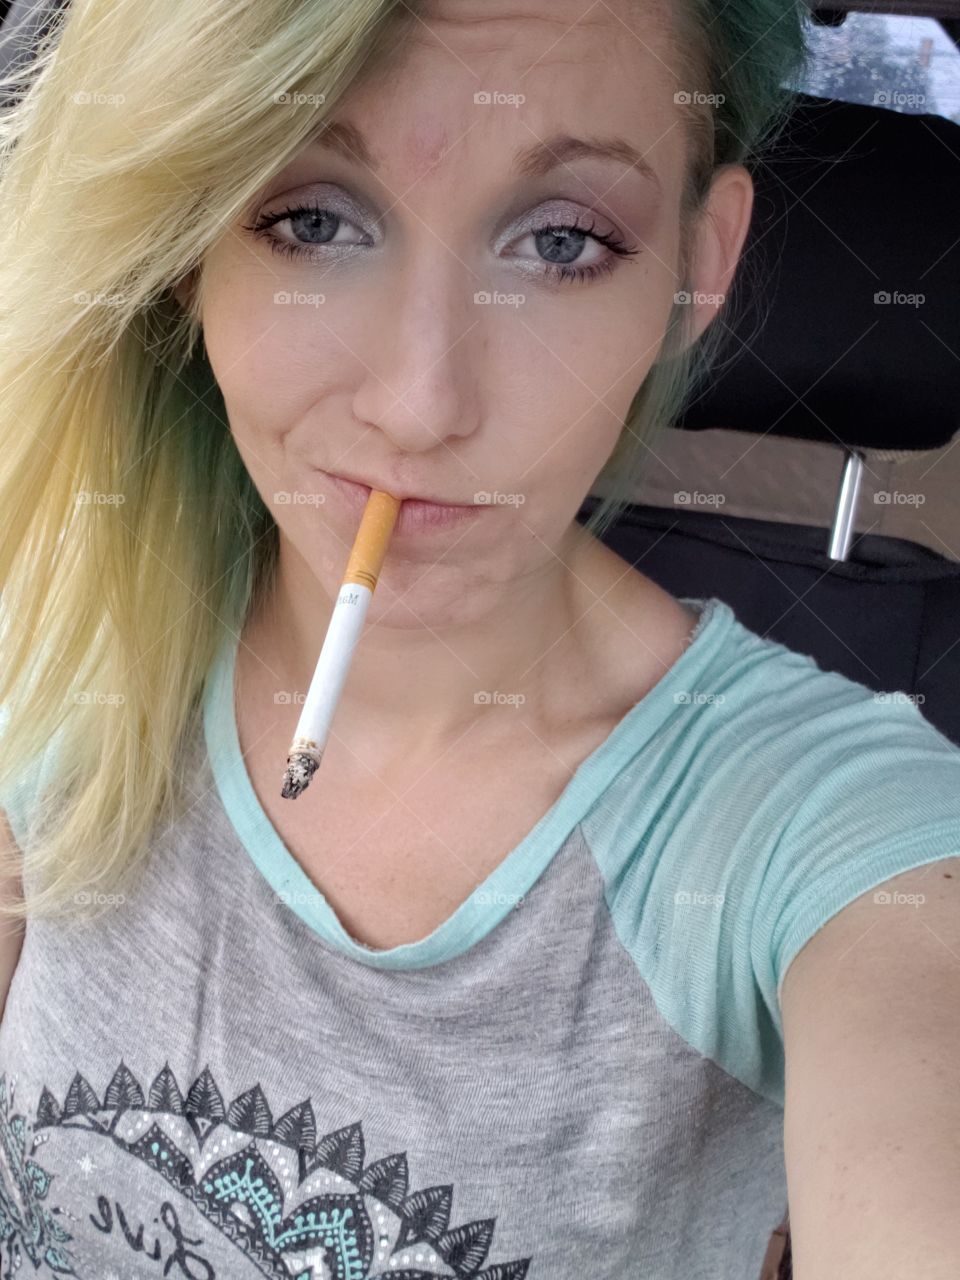 smoking is bad but I look pretty good doing it (;